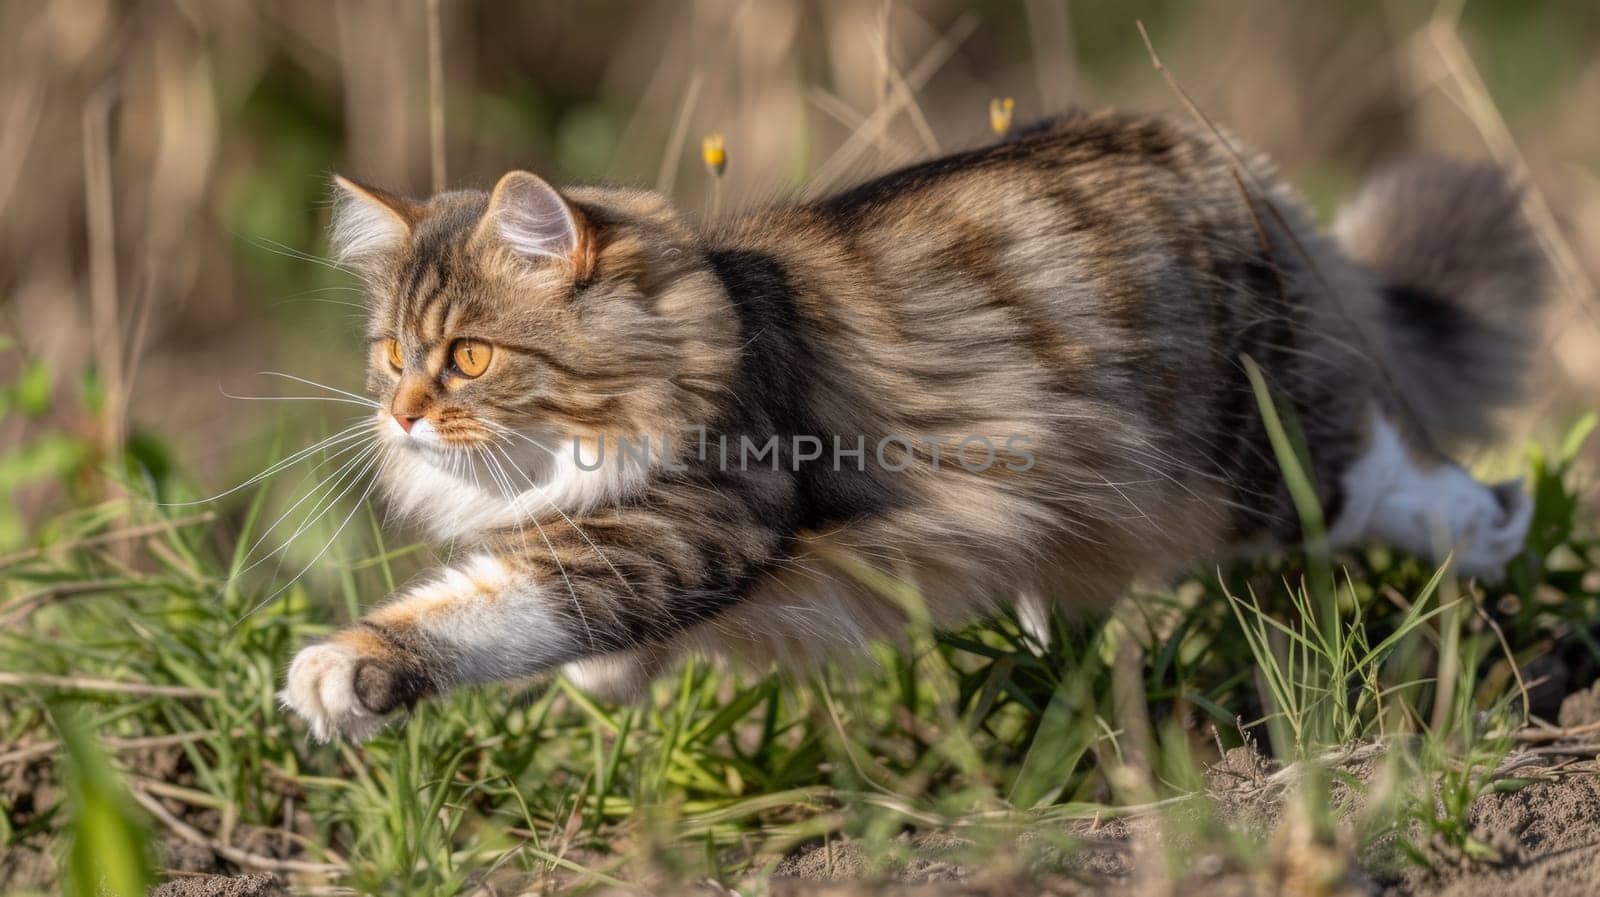 A cat running through a field of grass with its paws outstretched